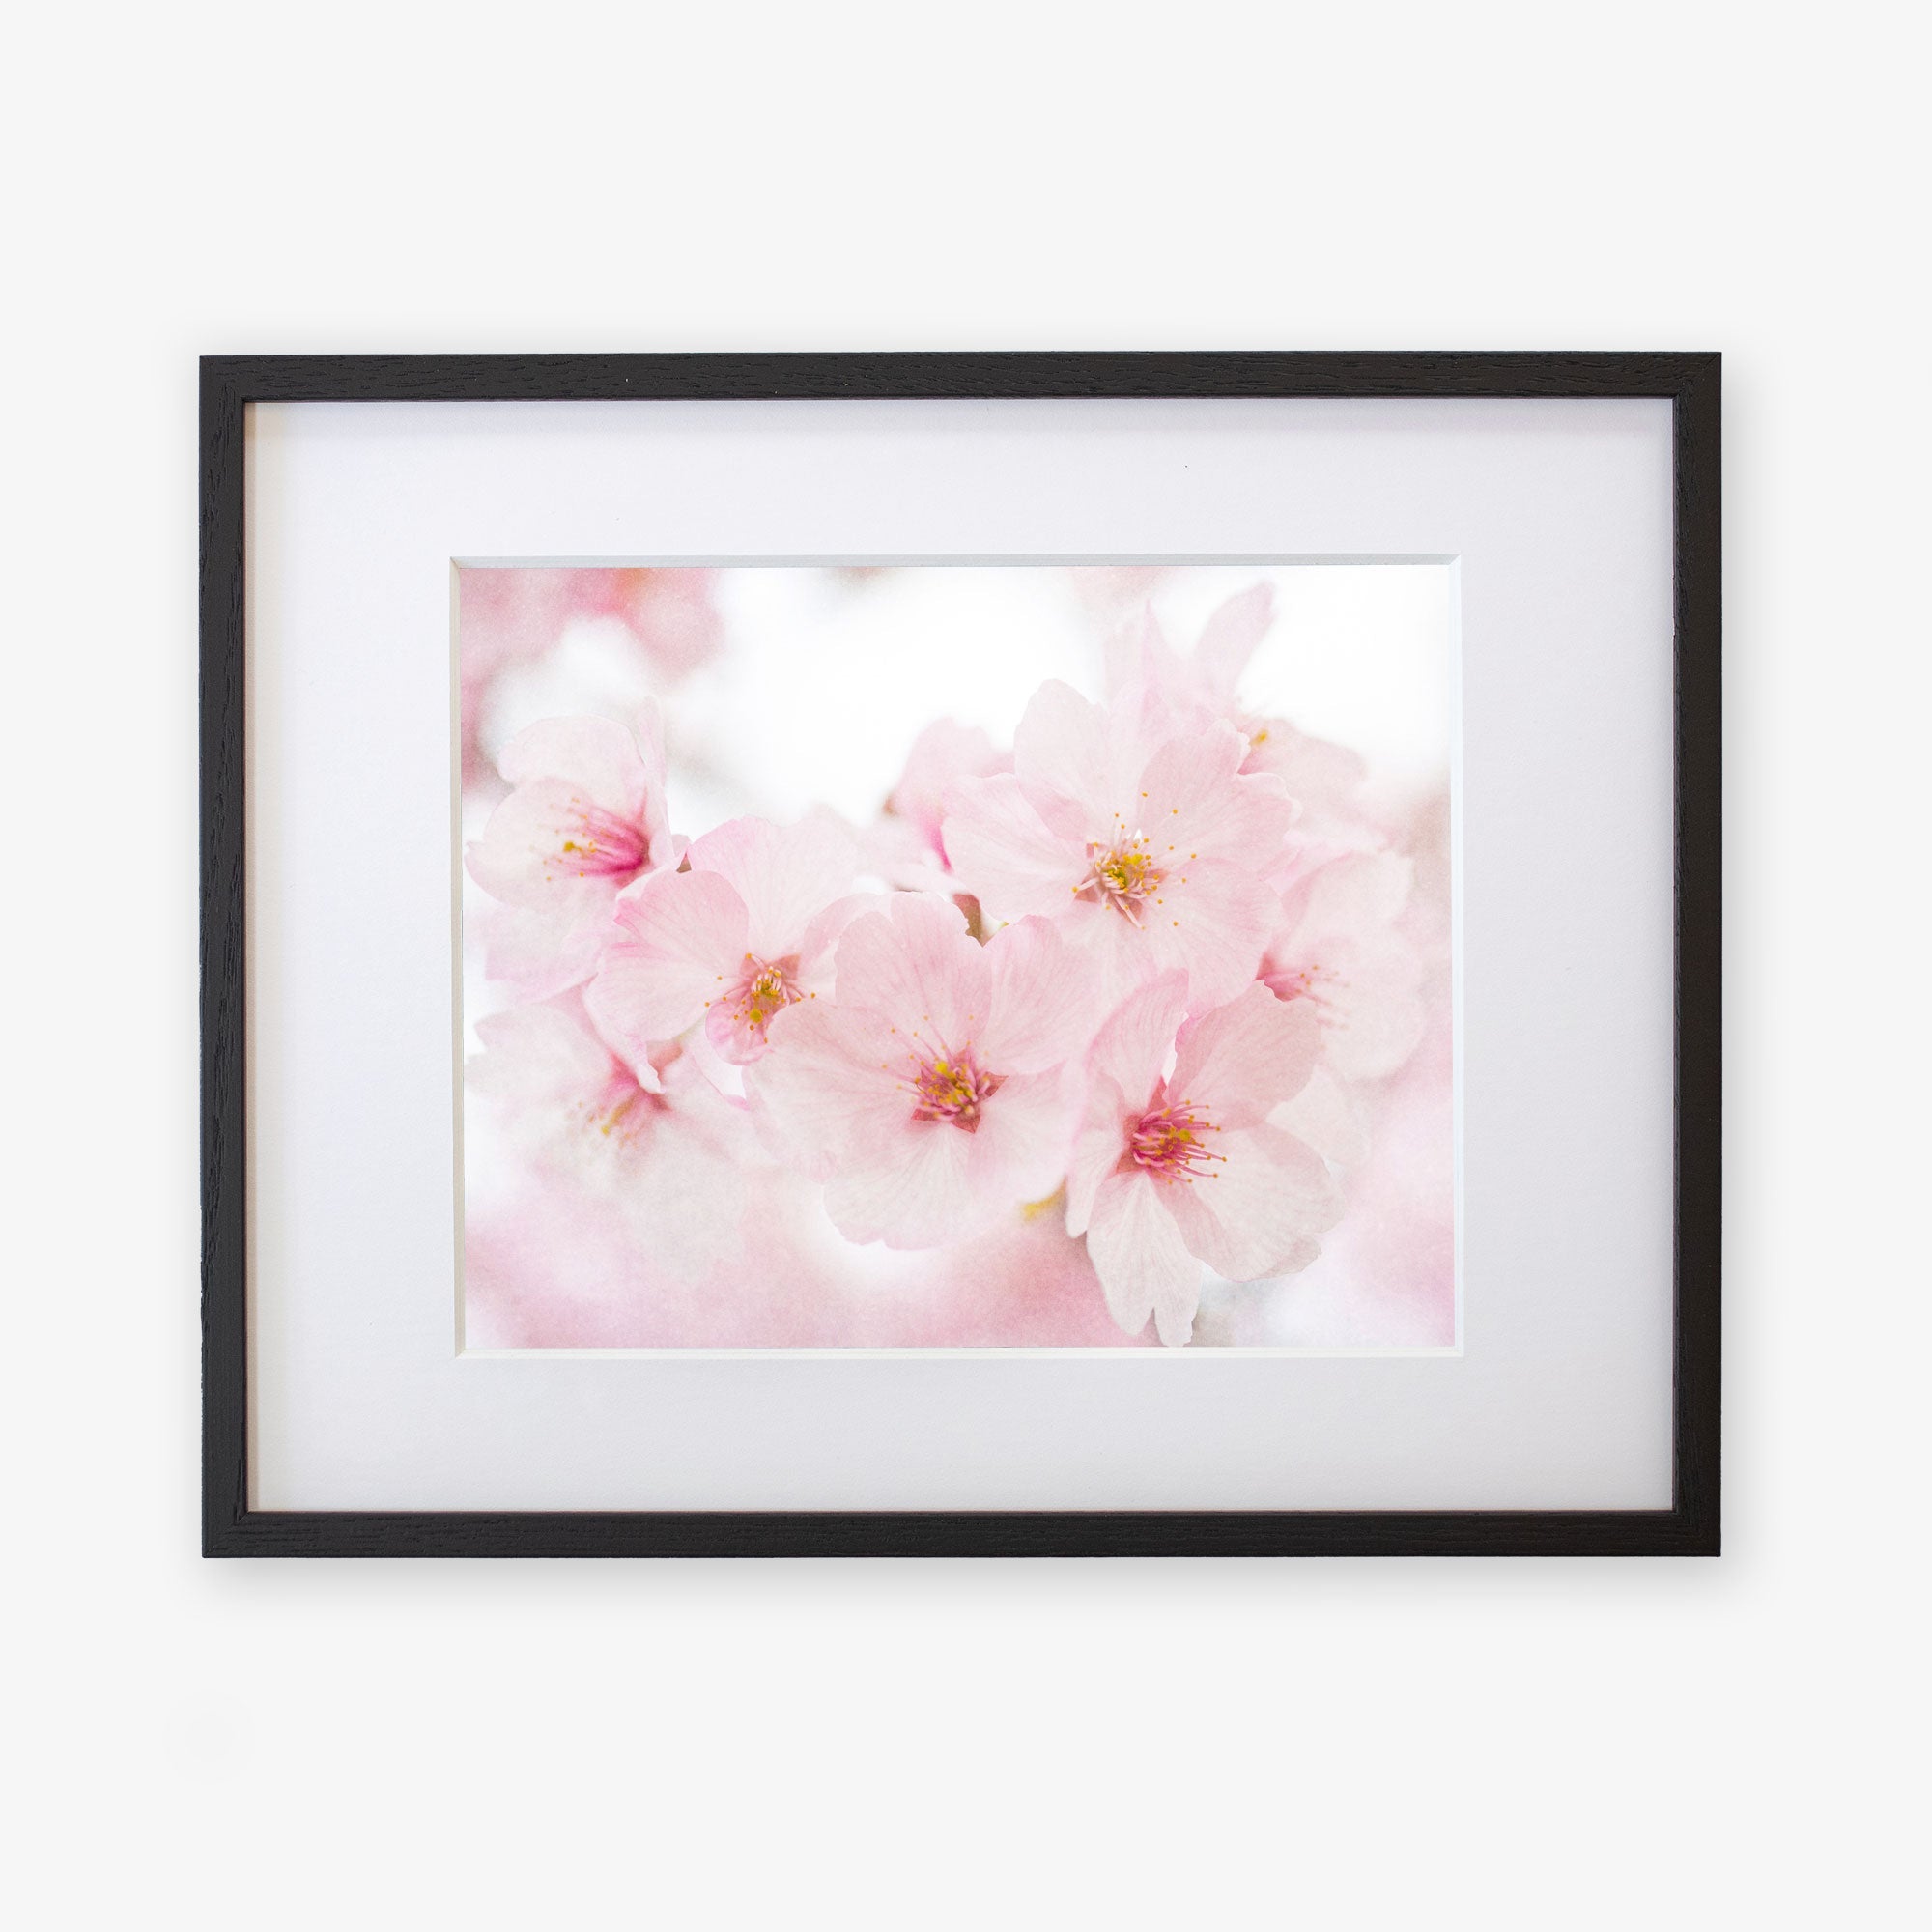 A framed Pink Flower Print of delicate pink cherry blossoms with visible stamens and petals, printed on archival photographic paper and hung on a white background by Offley Green.